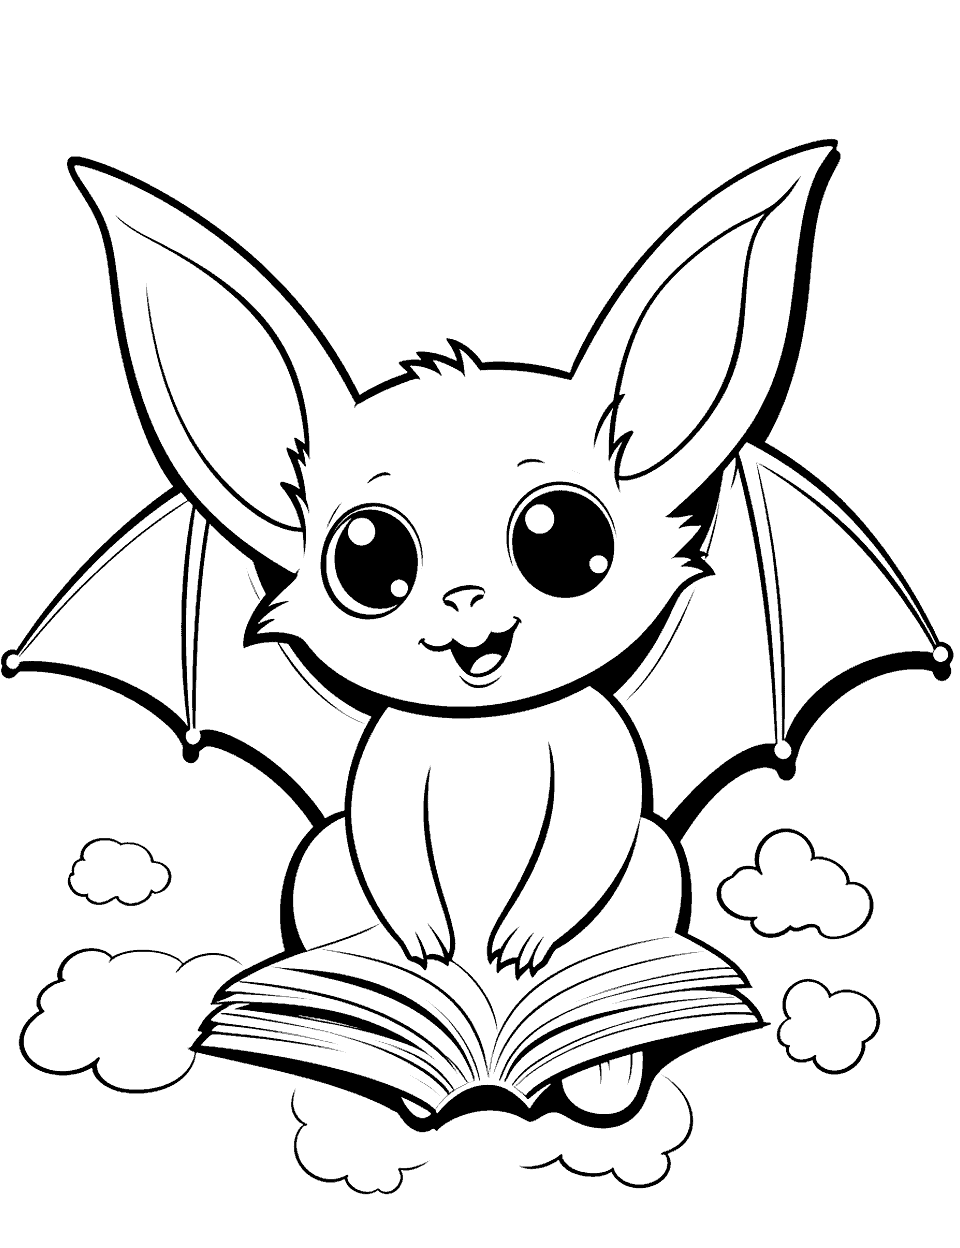 Bat Reading a Book Coloring Page - A scholarly bat reading a book, promoting education.